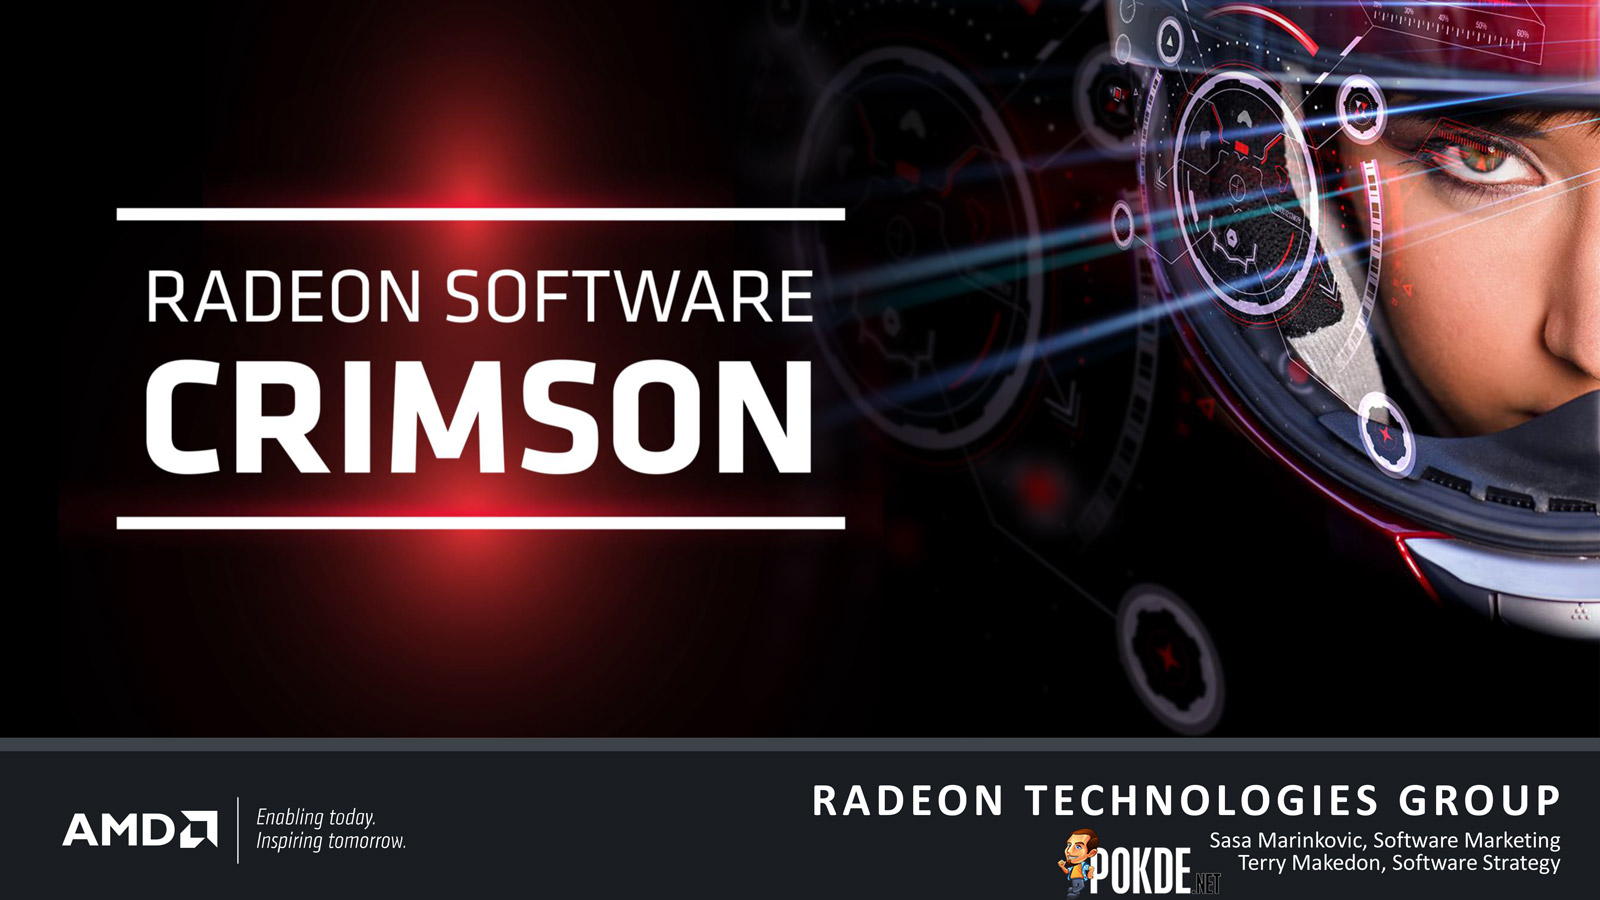 Radeon Technologies Group launched their first product today — Radeon Software Crimson Edition 39